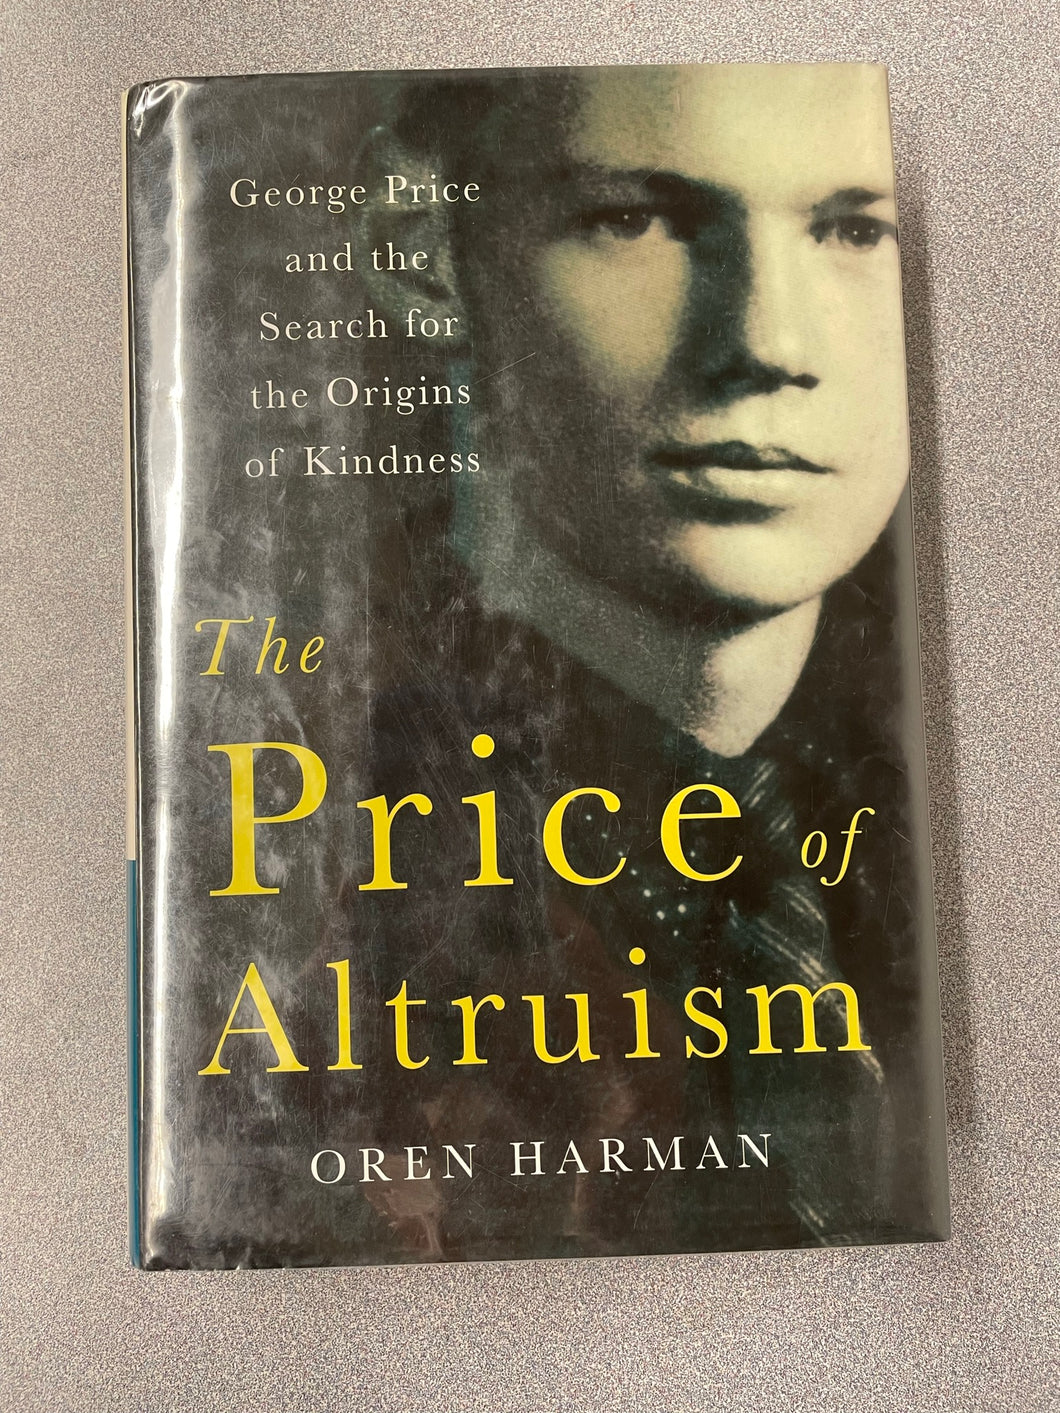 The Price of Altruism: George Price and the Search for the Origins of Kindness, Harman, Oren [2010] AN 8/23